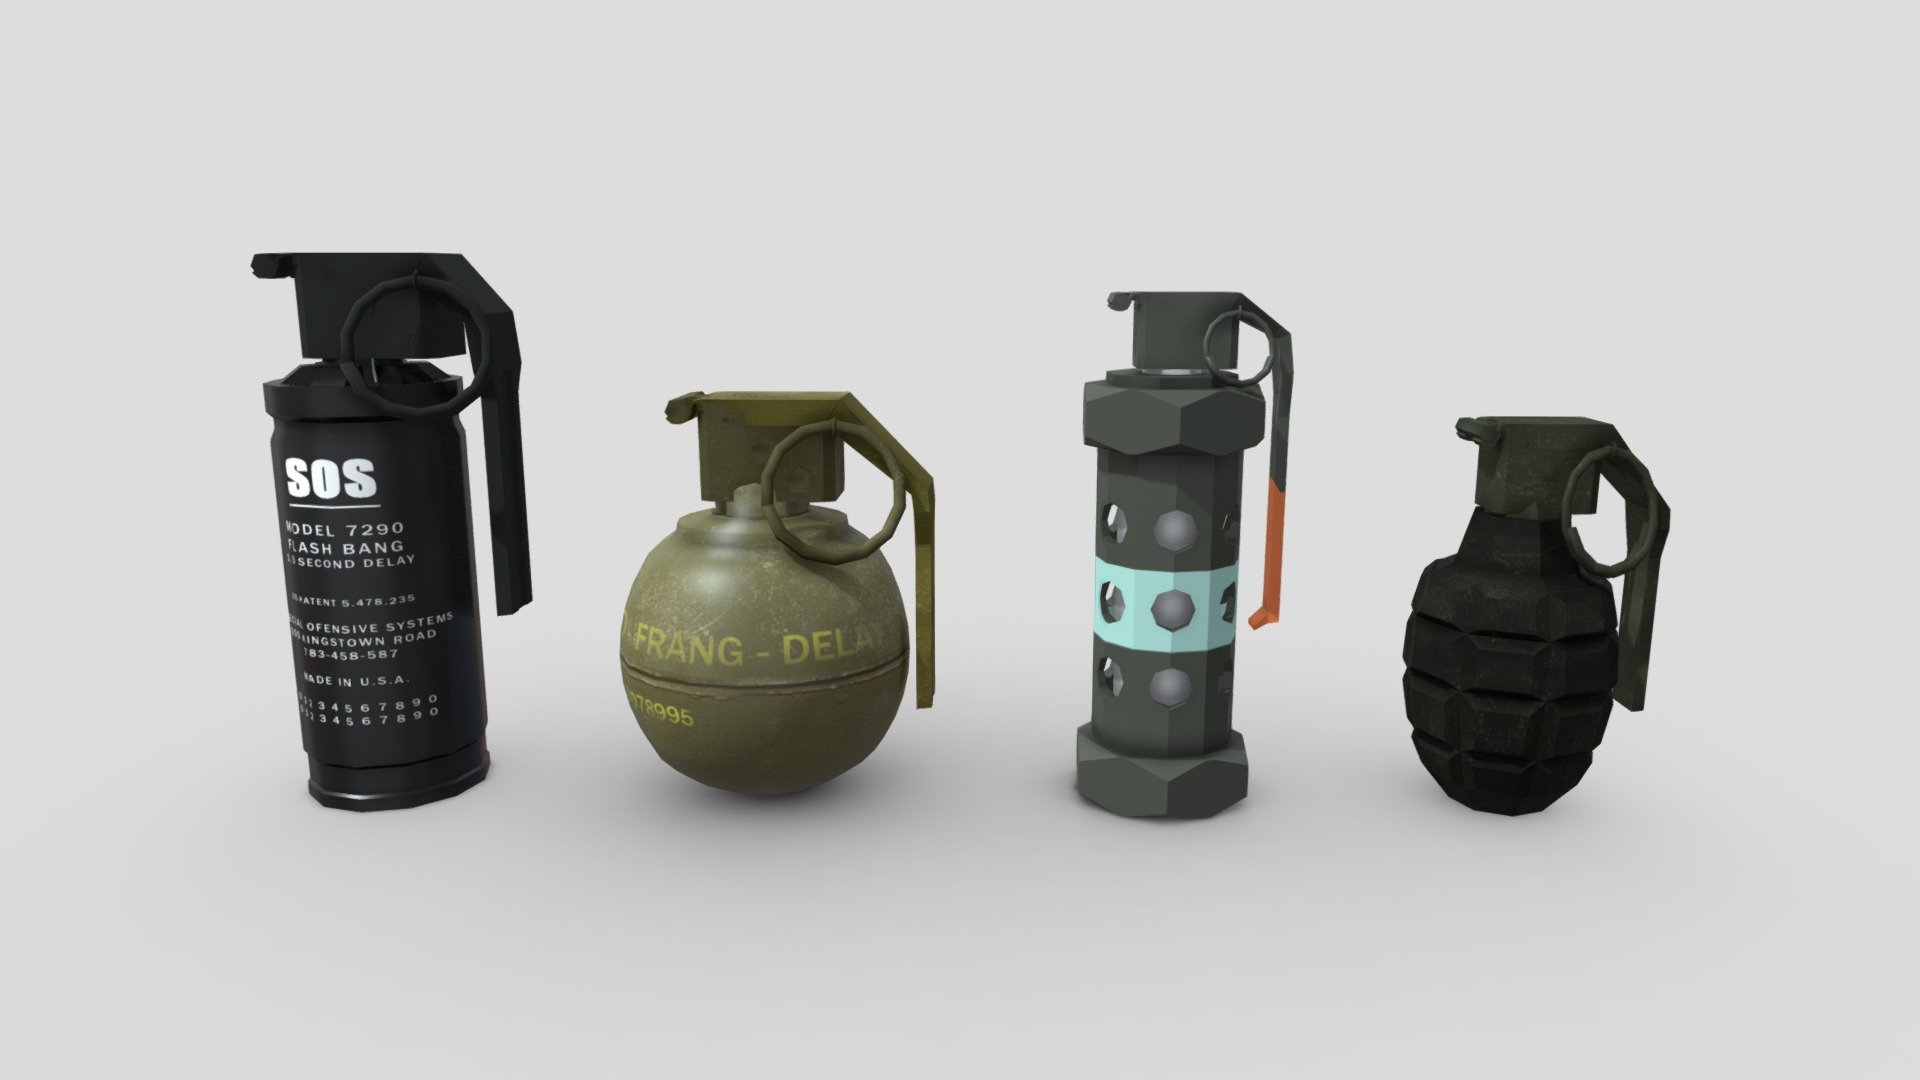 Features:





Polygons of all together: 5.796.




Polygons of M84: 1.679.



Polygon of Flashbang Model 7290: 1.181.

Polygon of Hand Grenade: 1.299.


Polygon of Grenade 7-74: 1.637.




Low poly and game ready.



All textures included and materials applied.

Grouped and nomed parts.

Optimized.

Easy to modify.

Plug-ins not required.

All formats tested and working.

Textures size: 2744x1720.

All models are present in a single scene to facilitate handling.
 - Grenade Pack - Buy Royalty Free 3D model by Elvair Lima (@elvair) 3d model